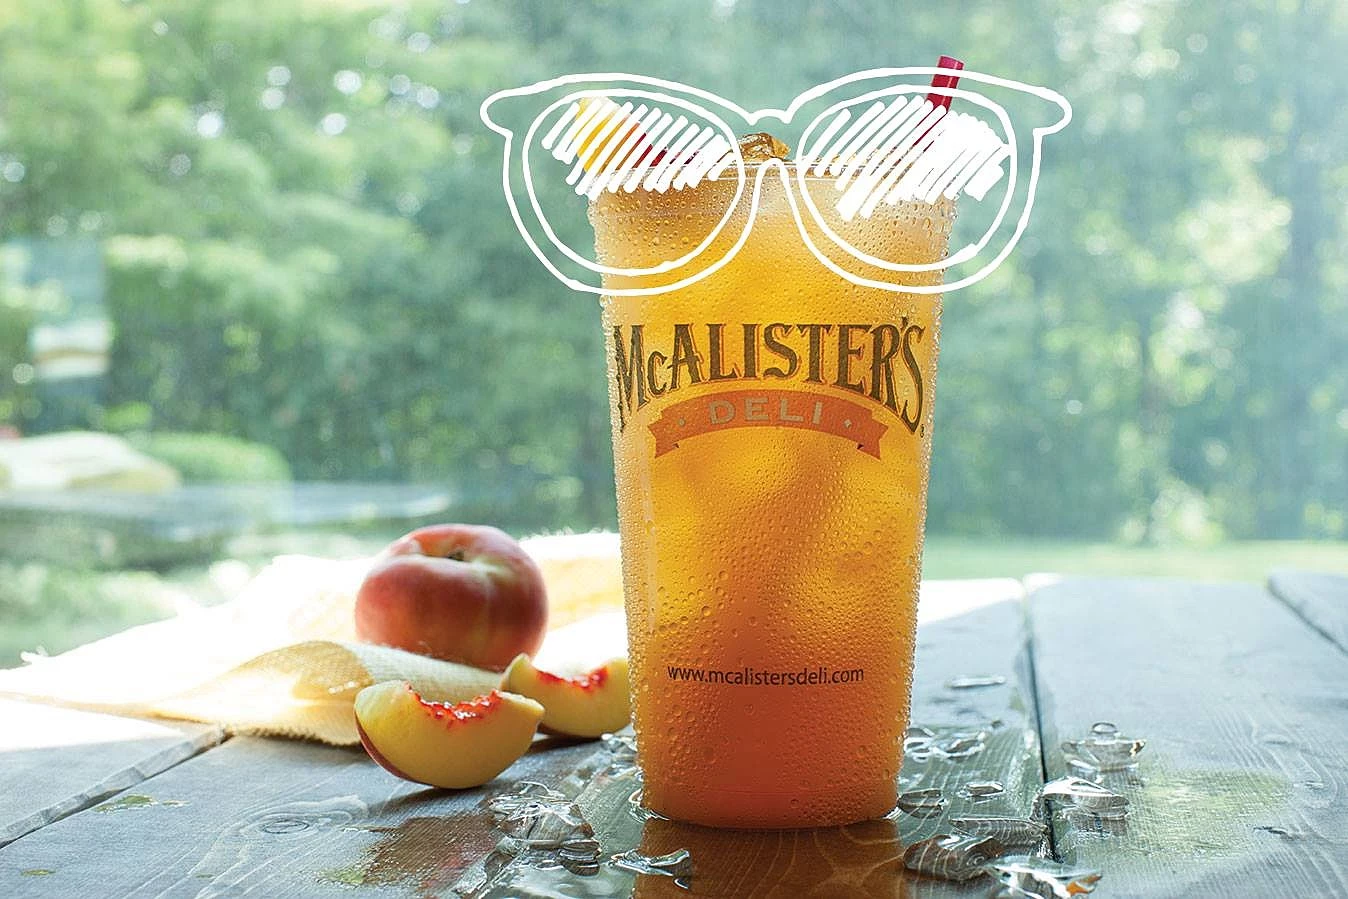 Tomorrow is Free Tea Day at McAlisters